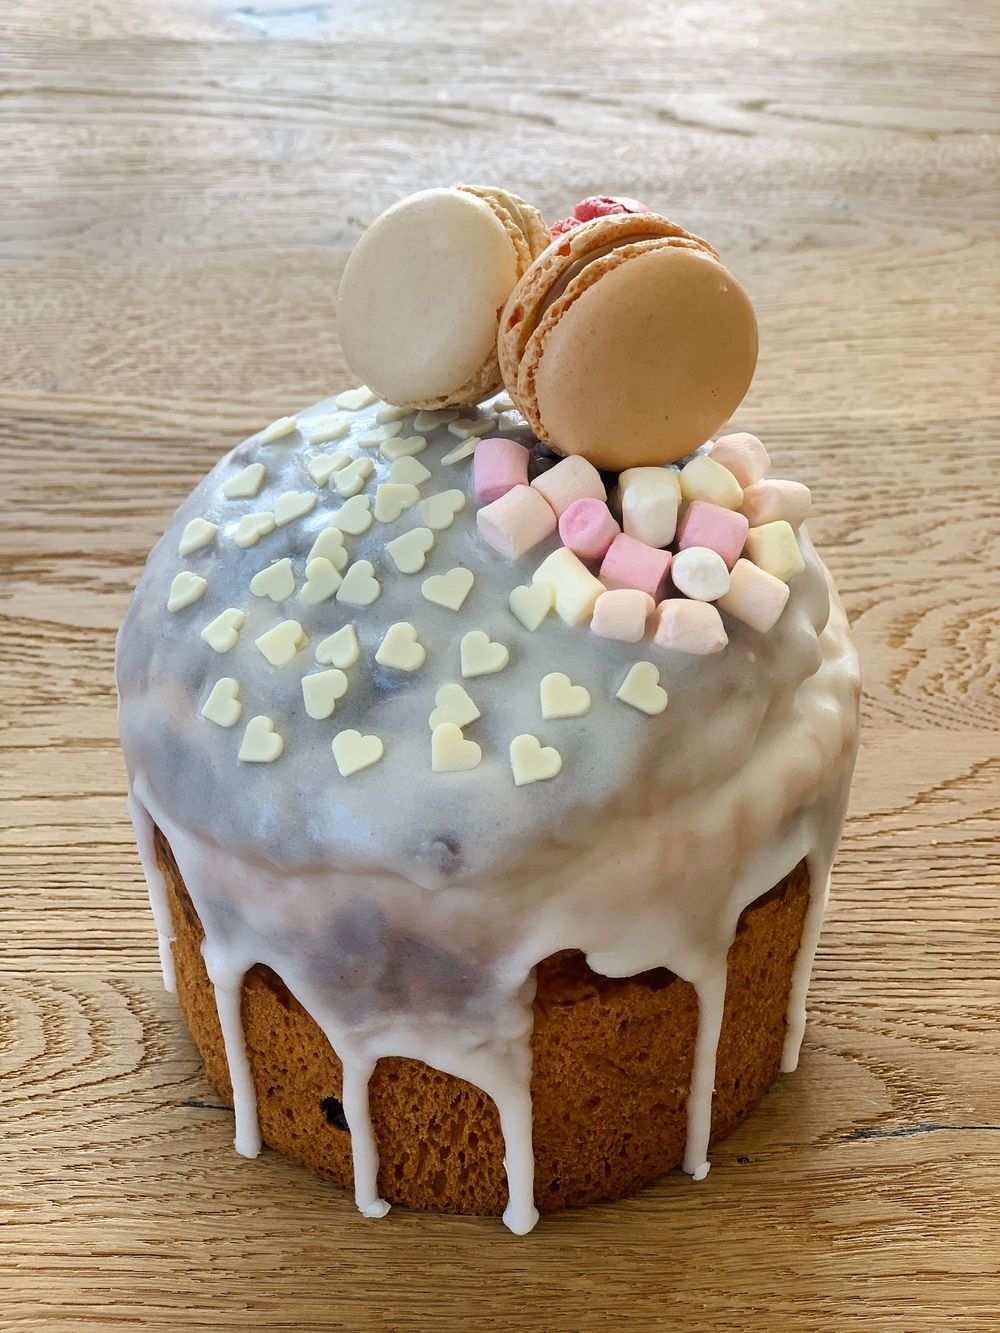 Russian Easter Cake (Kulich) decorated with macarons, marshmallow and white chocolate